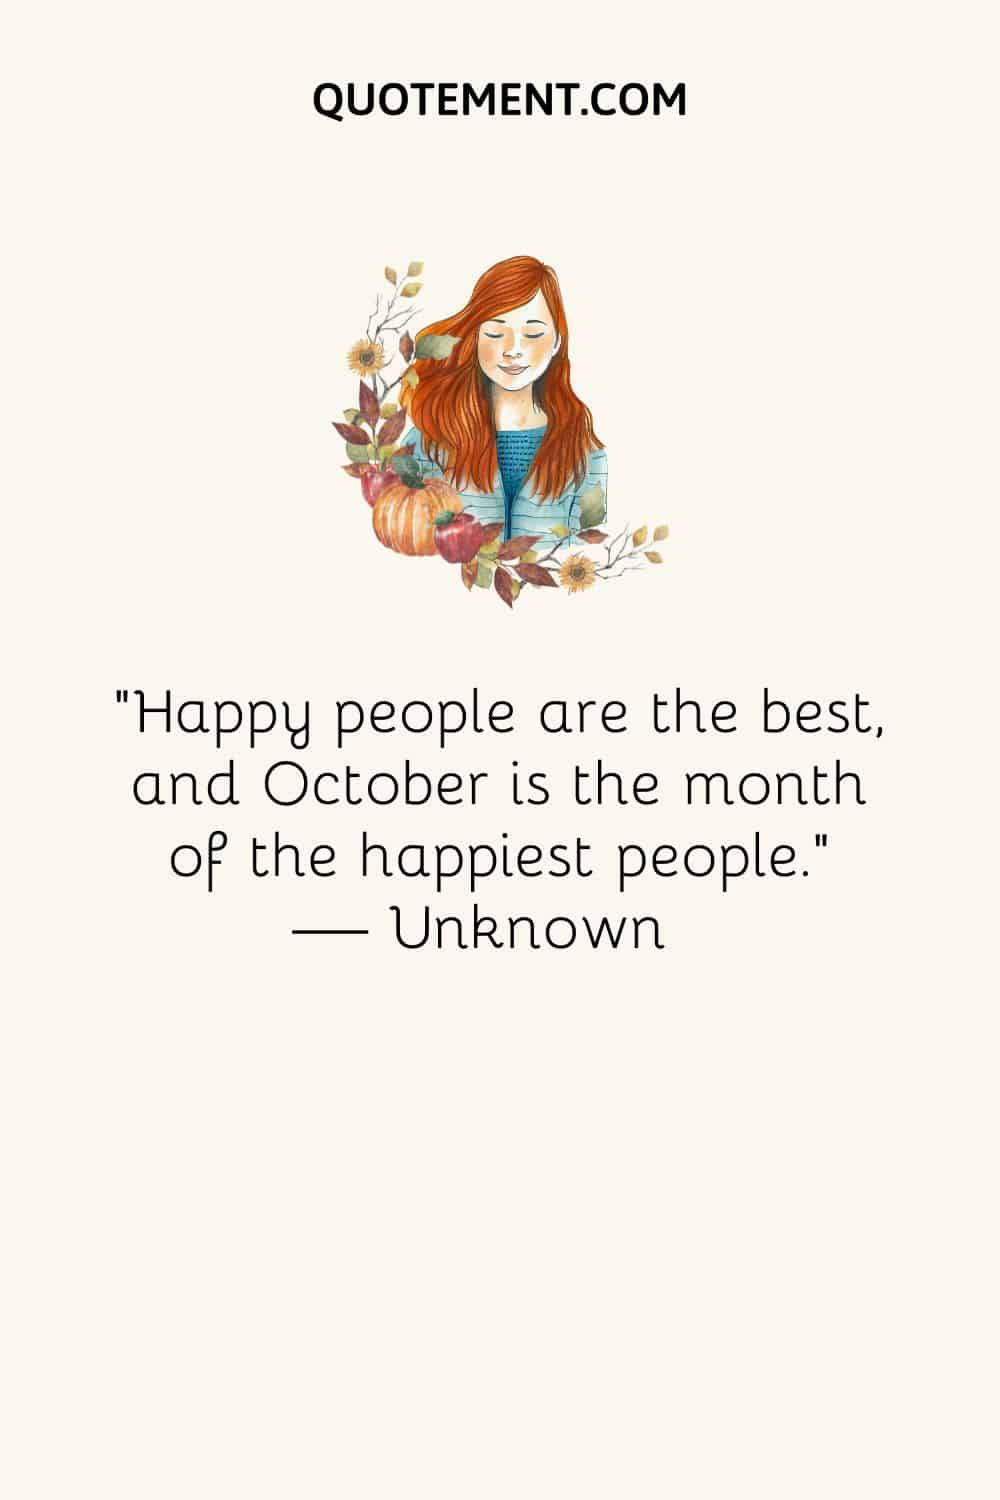 Happy people are the best, and October is the month of the happiest people